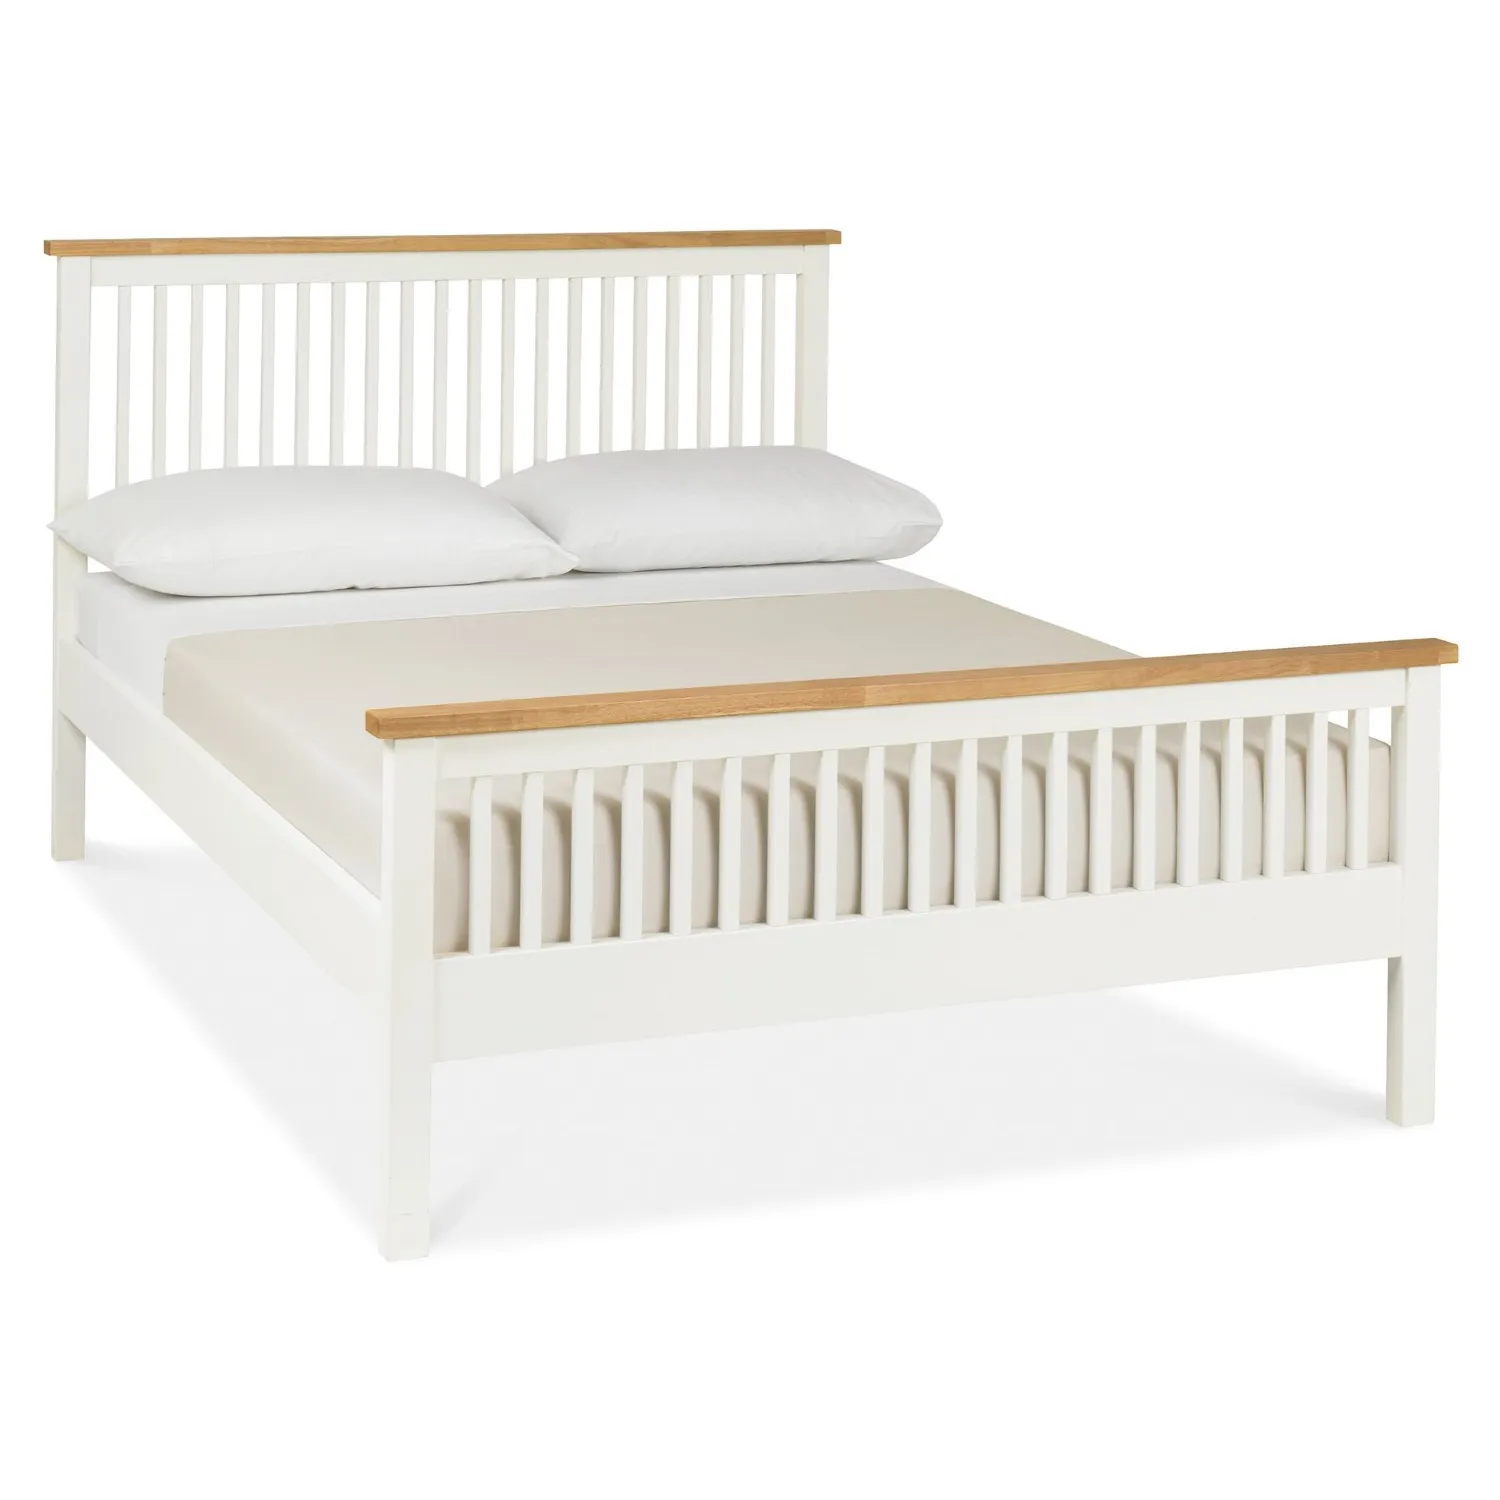 White Painted Oak Top King Size Bed